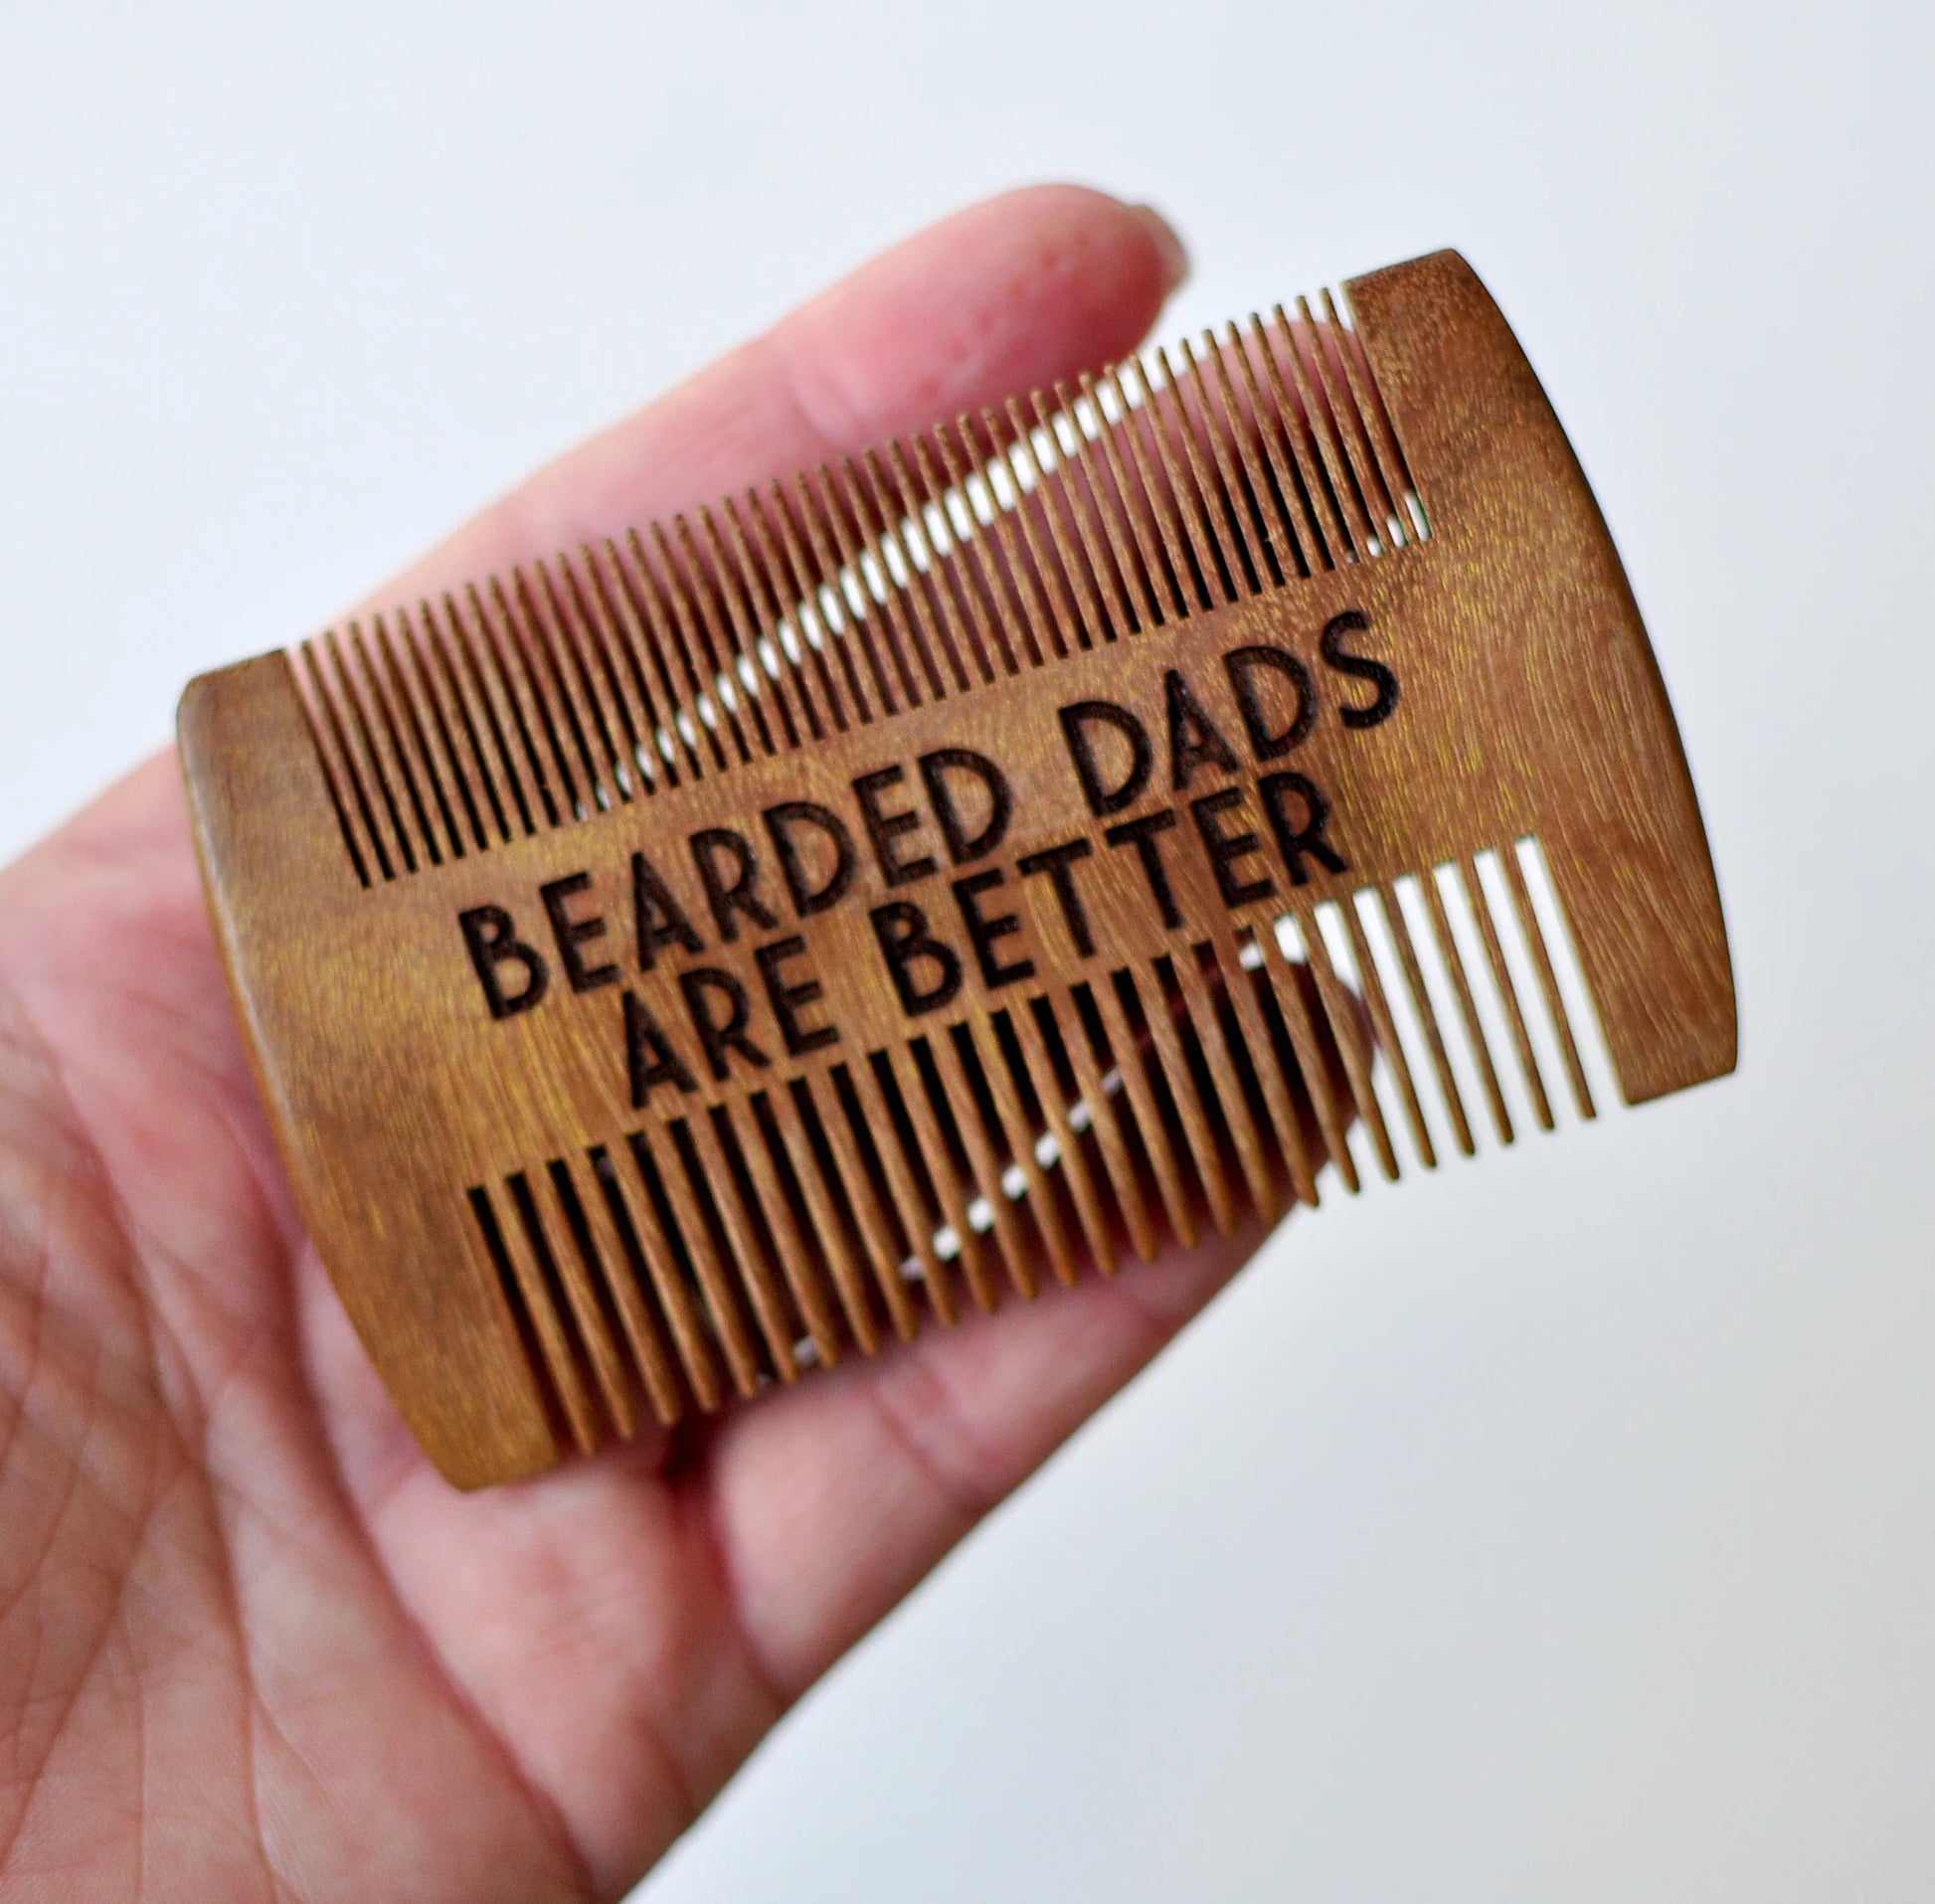 Bearded Dads Are Better - Beard Comb